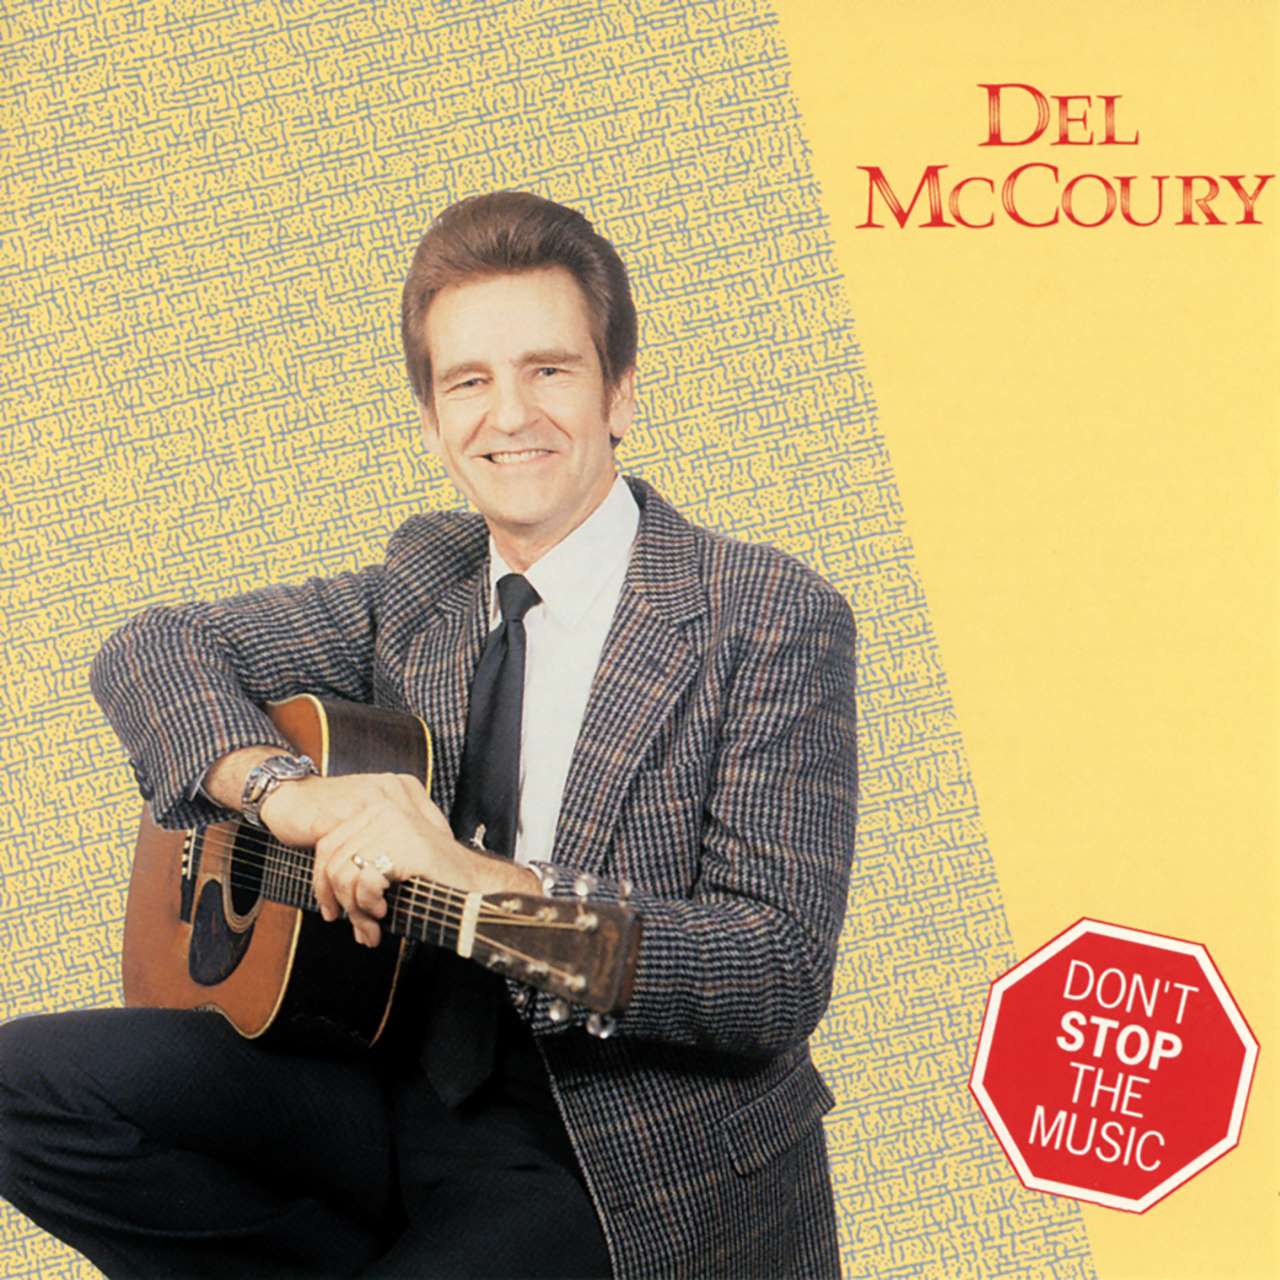 Del McCoury - Don’t Stop The Music cover album